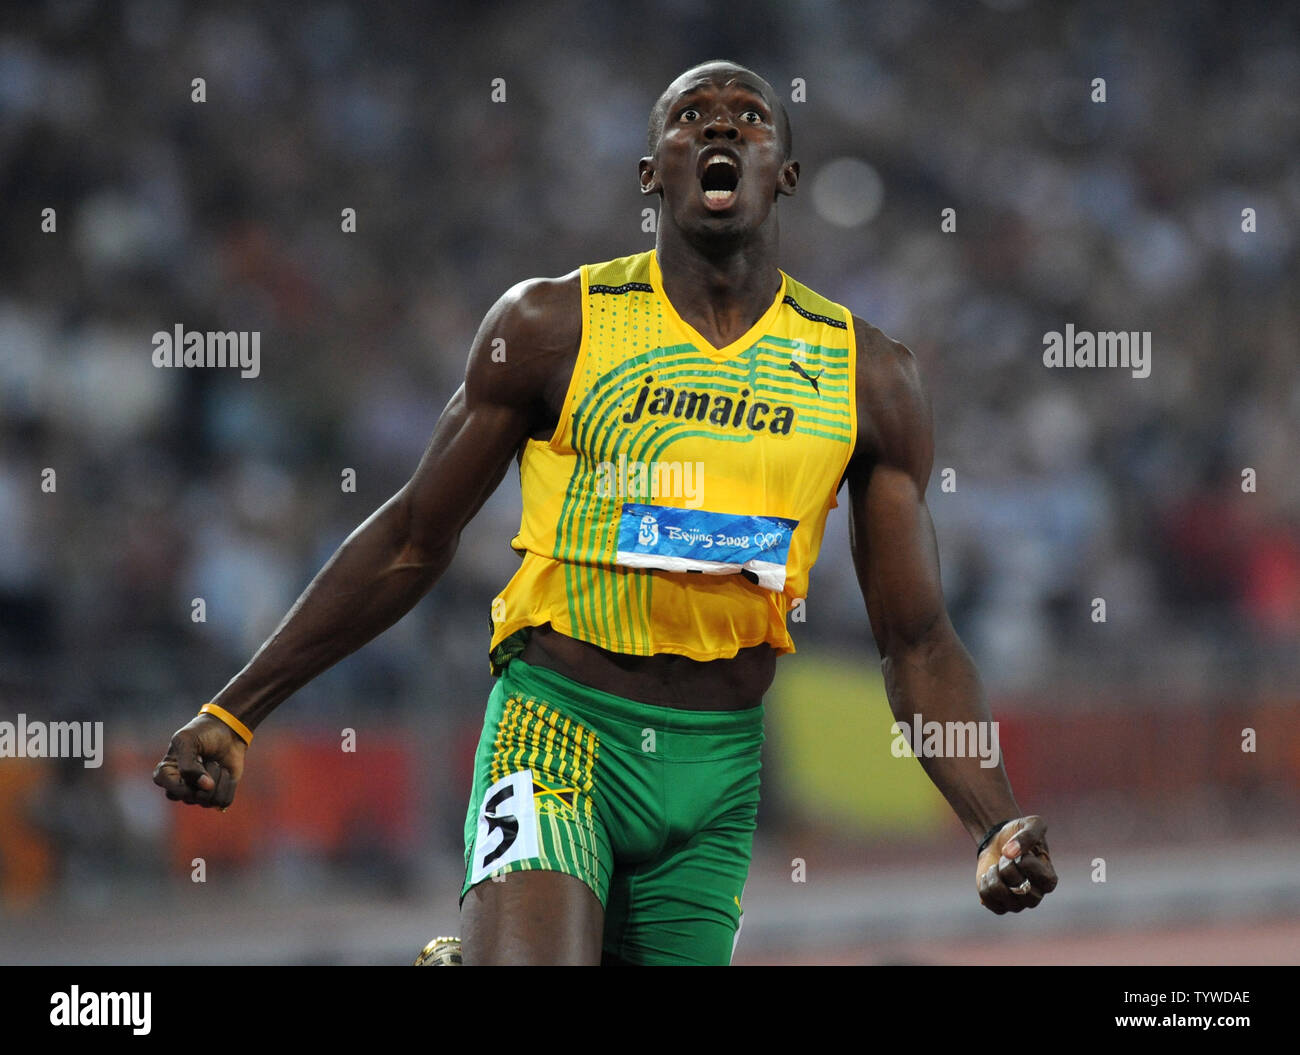 Jamaica's Usain Bolt jubilates as he crosses the finish line and sees that he has won the gold medal and broken the world's record in the Men's 200 meter race at the National Stadium at the Summer Olympics in Beijing on August 20, 2008. Bolt set a new world record of 19.30. seconds, breaking USA's Michael Johnson's record of 19.32 set in 1996.   (UPI Photo/Pat Benic) Stock Photo